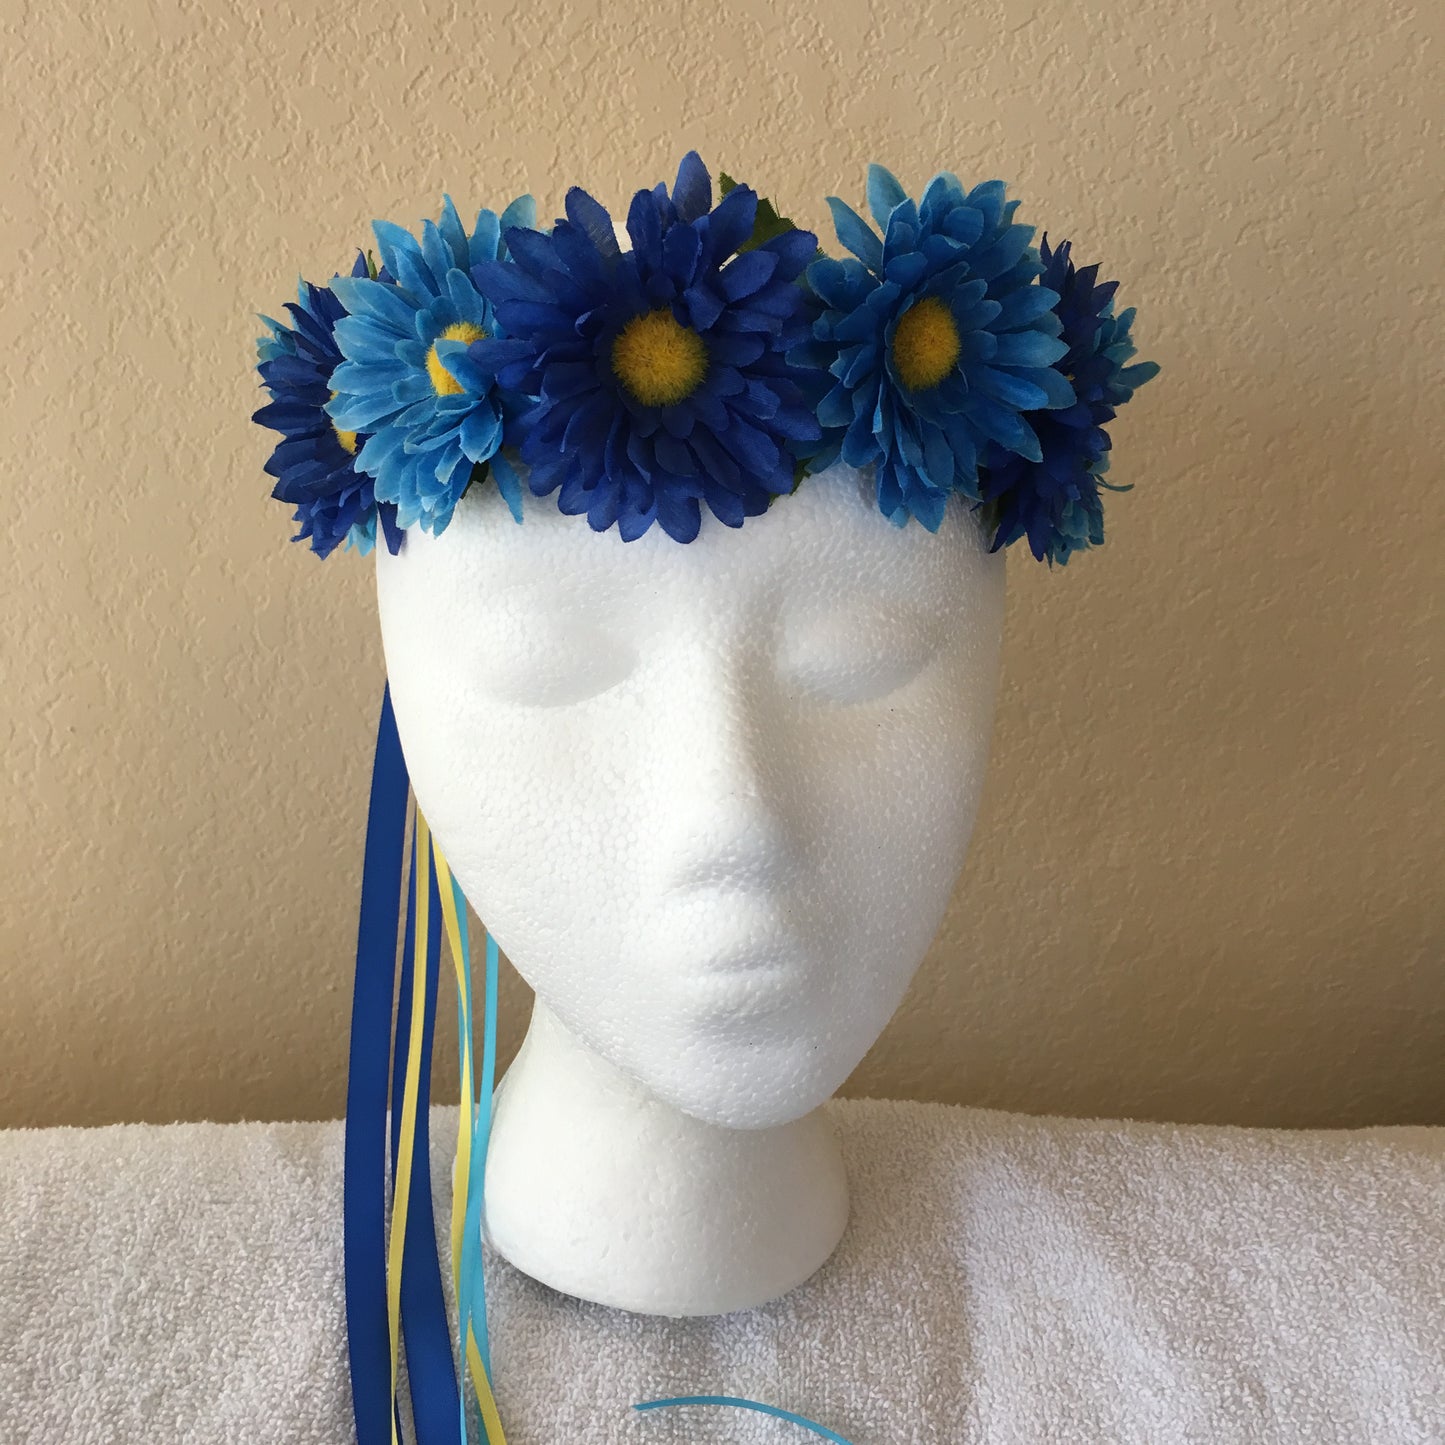 Small Wreath - Every other light and dark blue daisies (2)